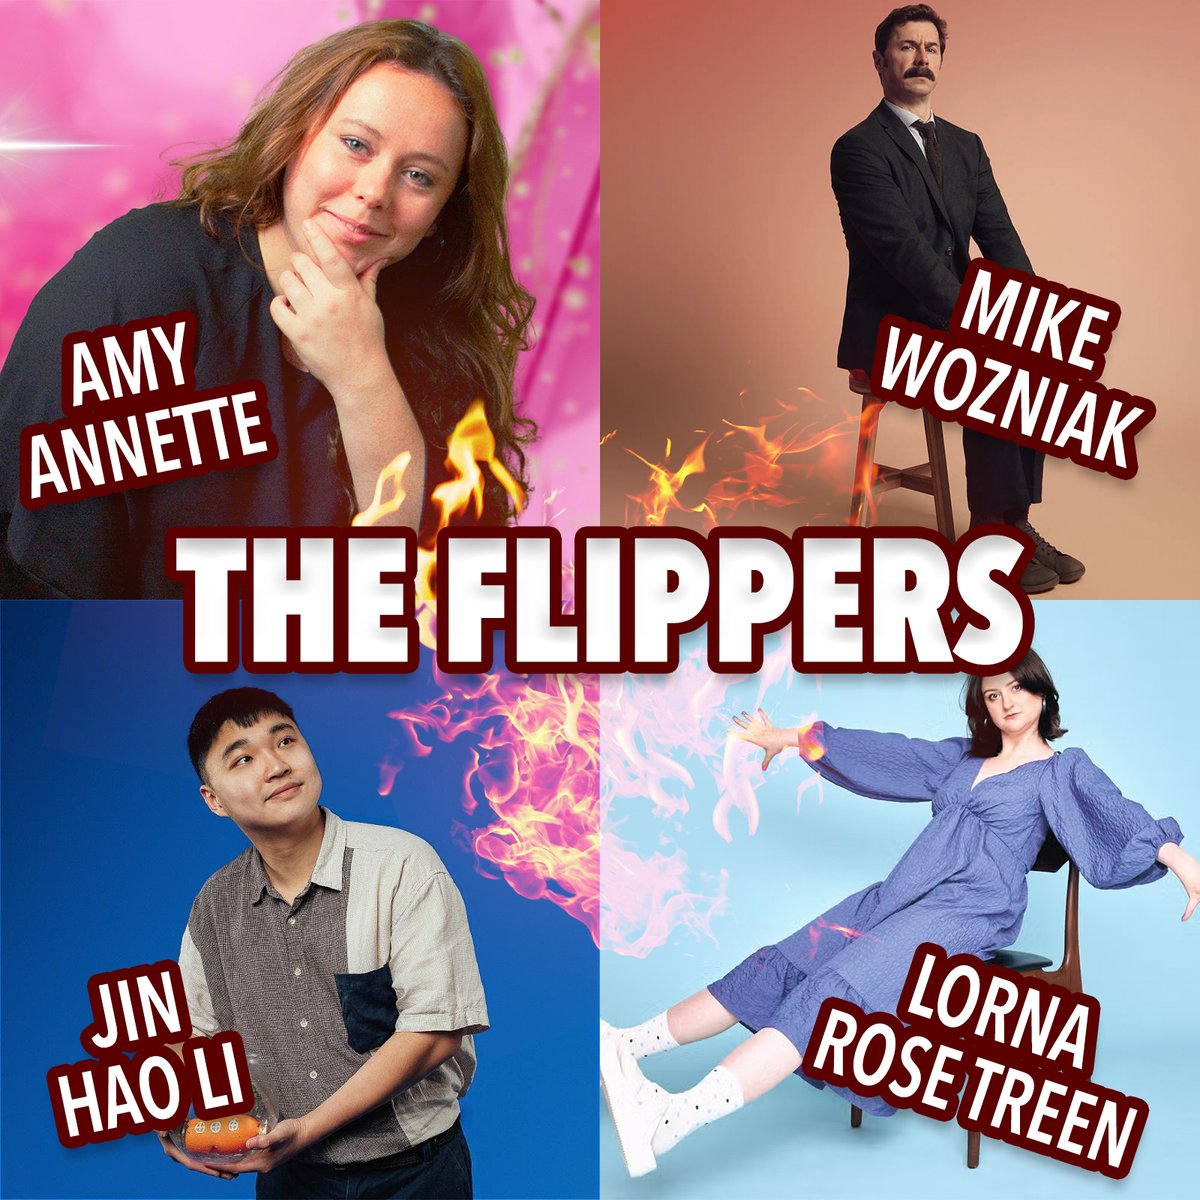 saturday night @machcomedyfest is flip heaven machcomedyfest.co.uk/show/2024/6604/ me & @sikisacomedy present a beer mat flipping championship with @jin_hao_li @lornlornlors @mrmikewozniak @theamyannette & more competing